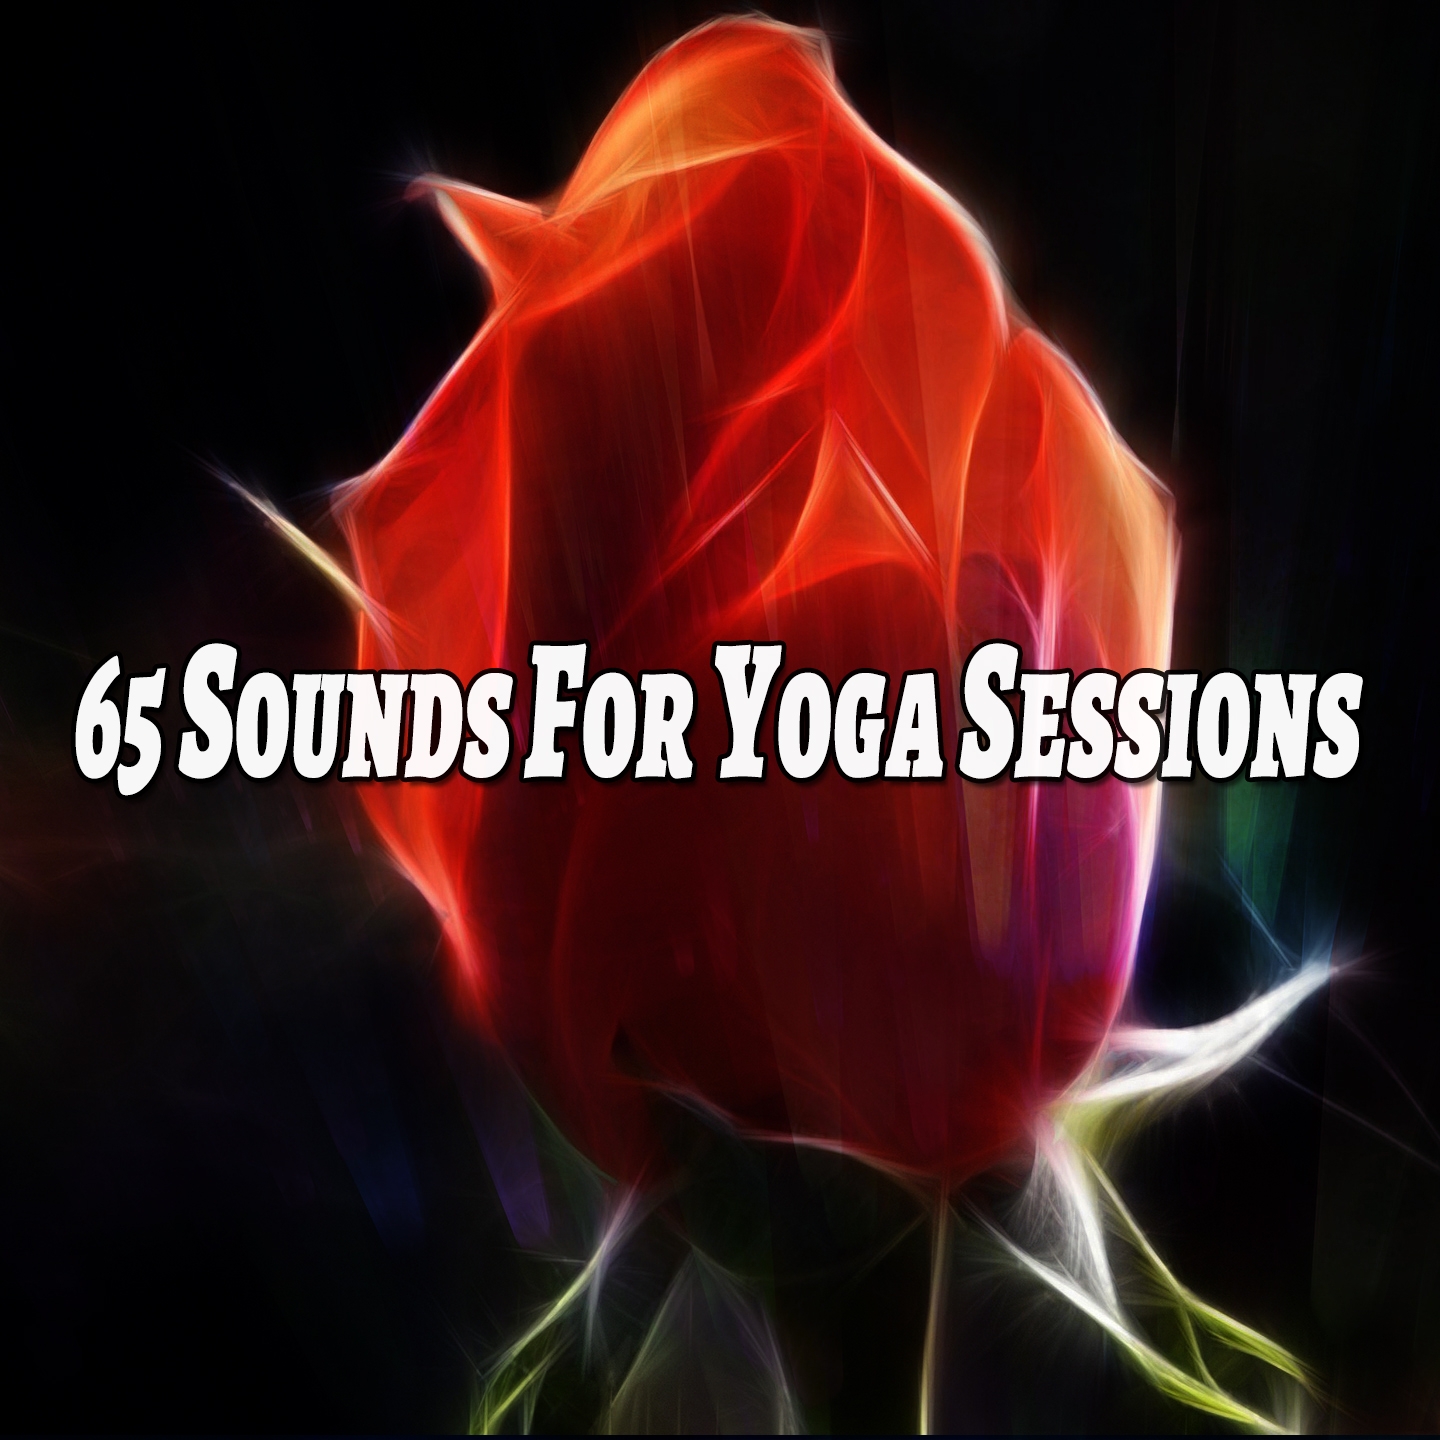 65 Sounds For Yoga Sessions